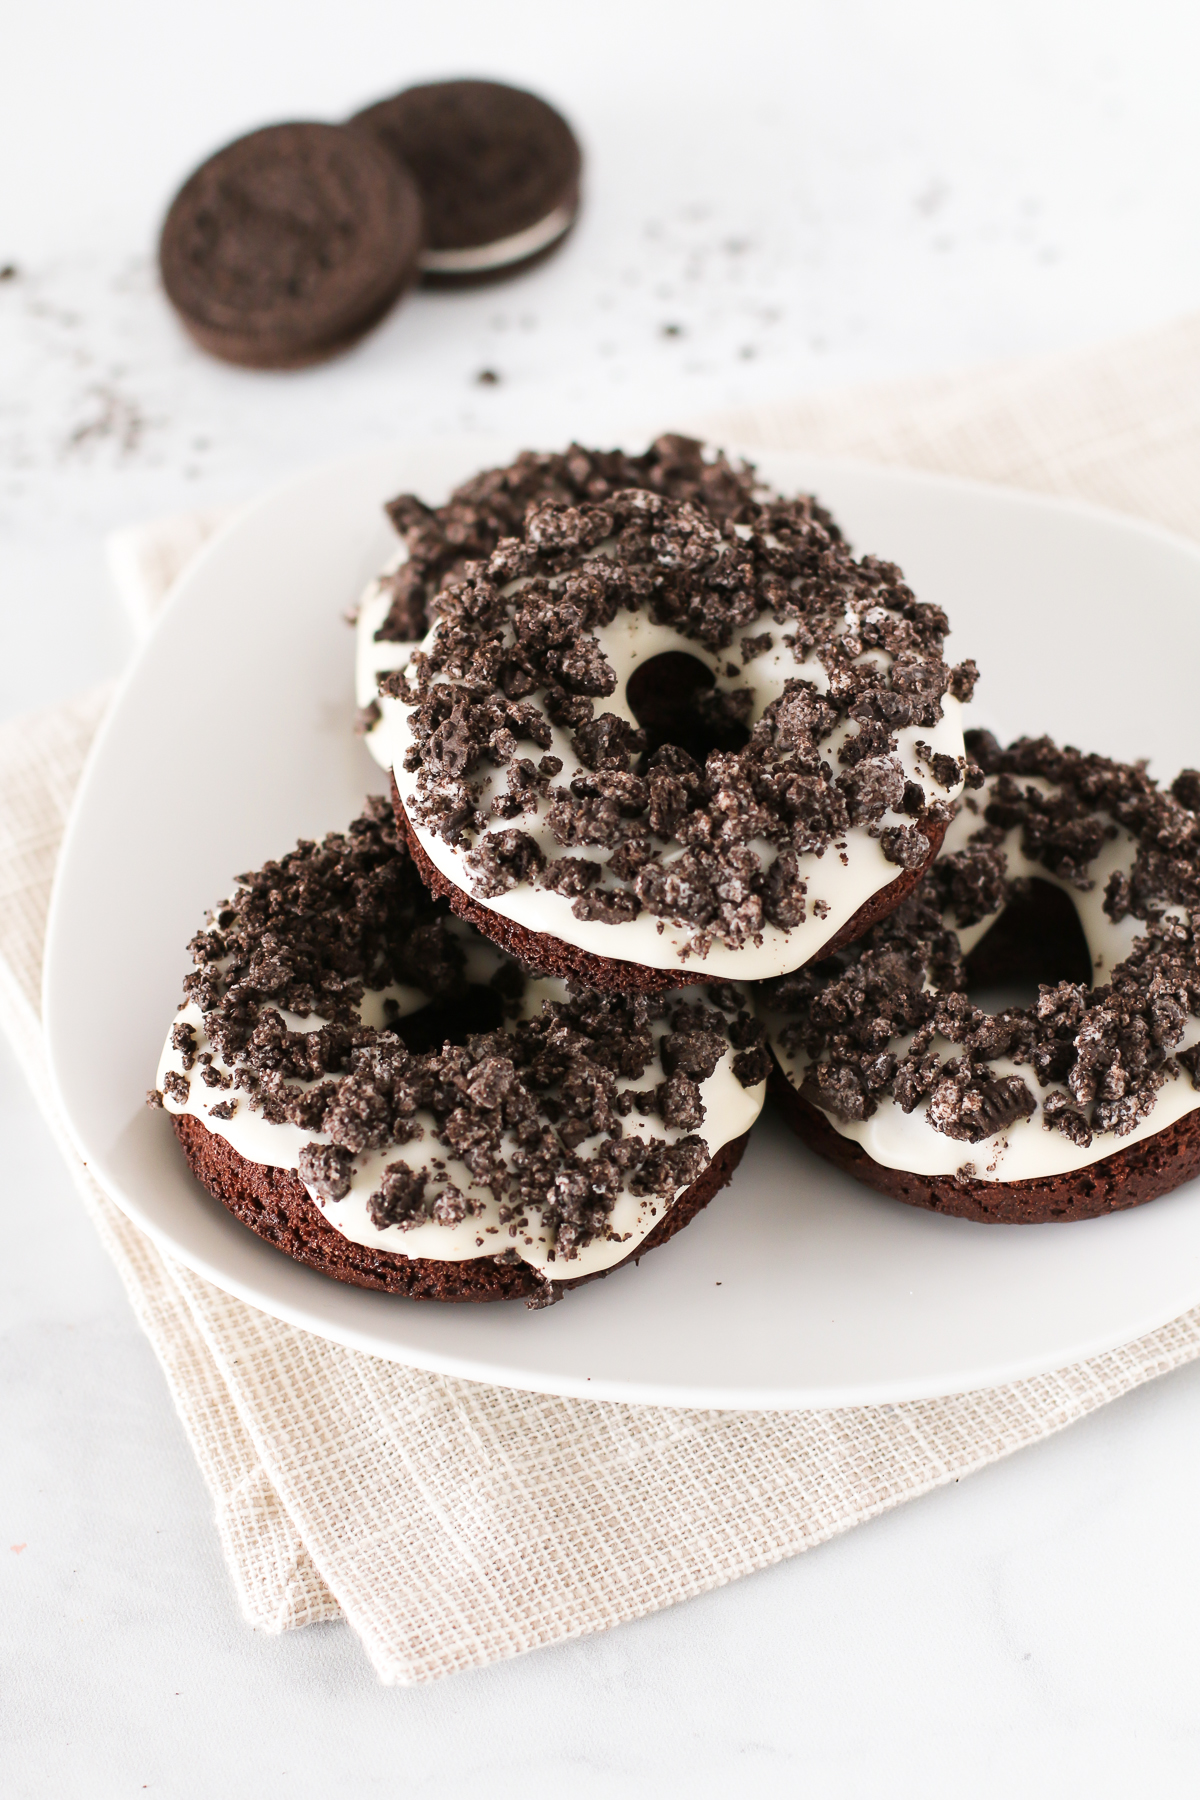 Gluten Free Vegan Cookies N’ Cream Donuts. Baked chocolate donuts with a vanilla glaze, covered with crushed Oreo cookies. Oh so tasty!